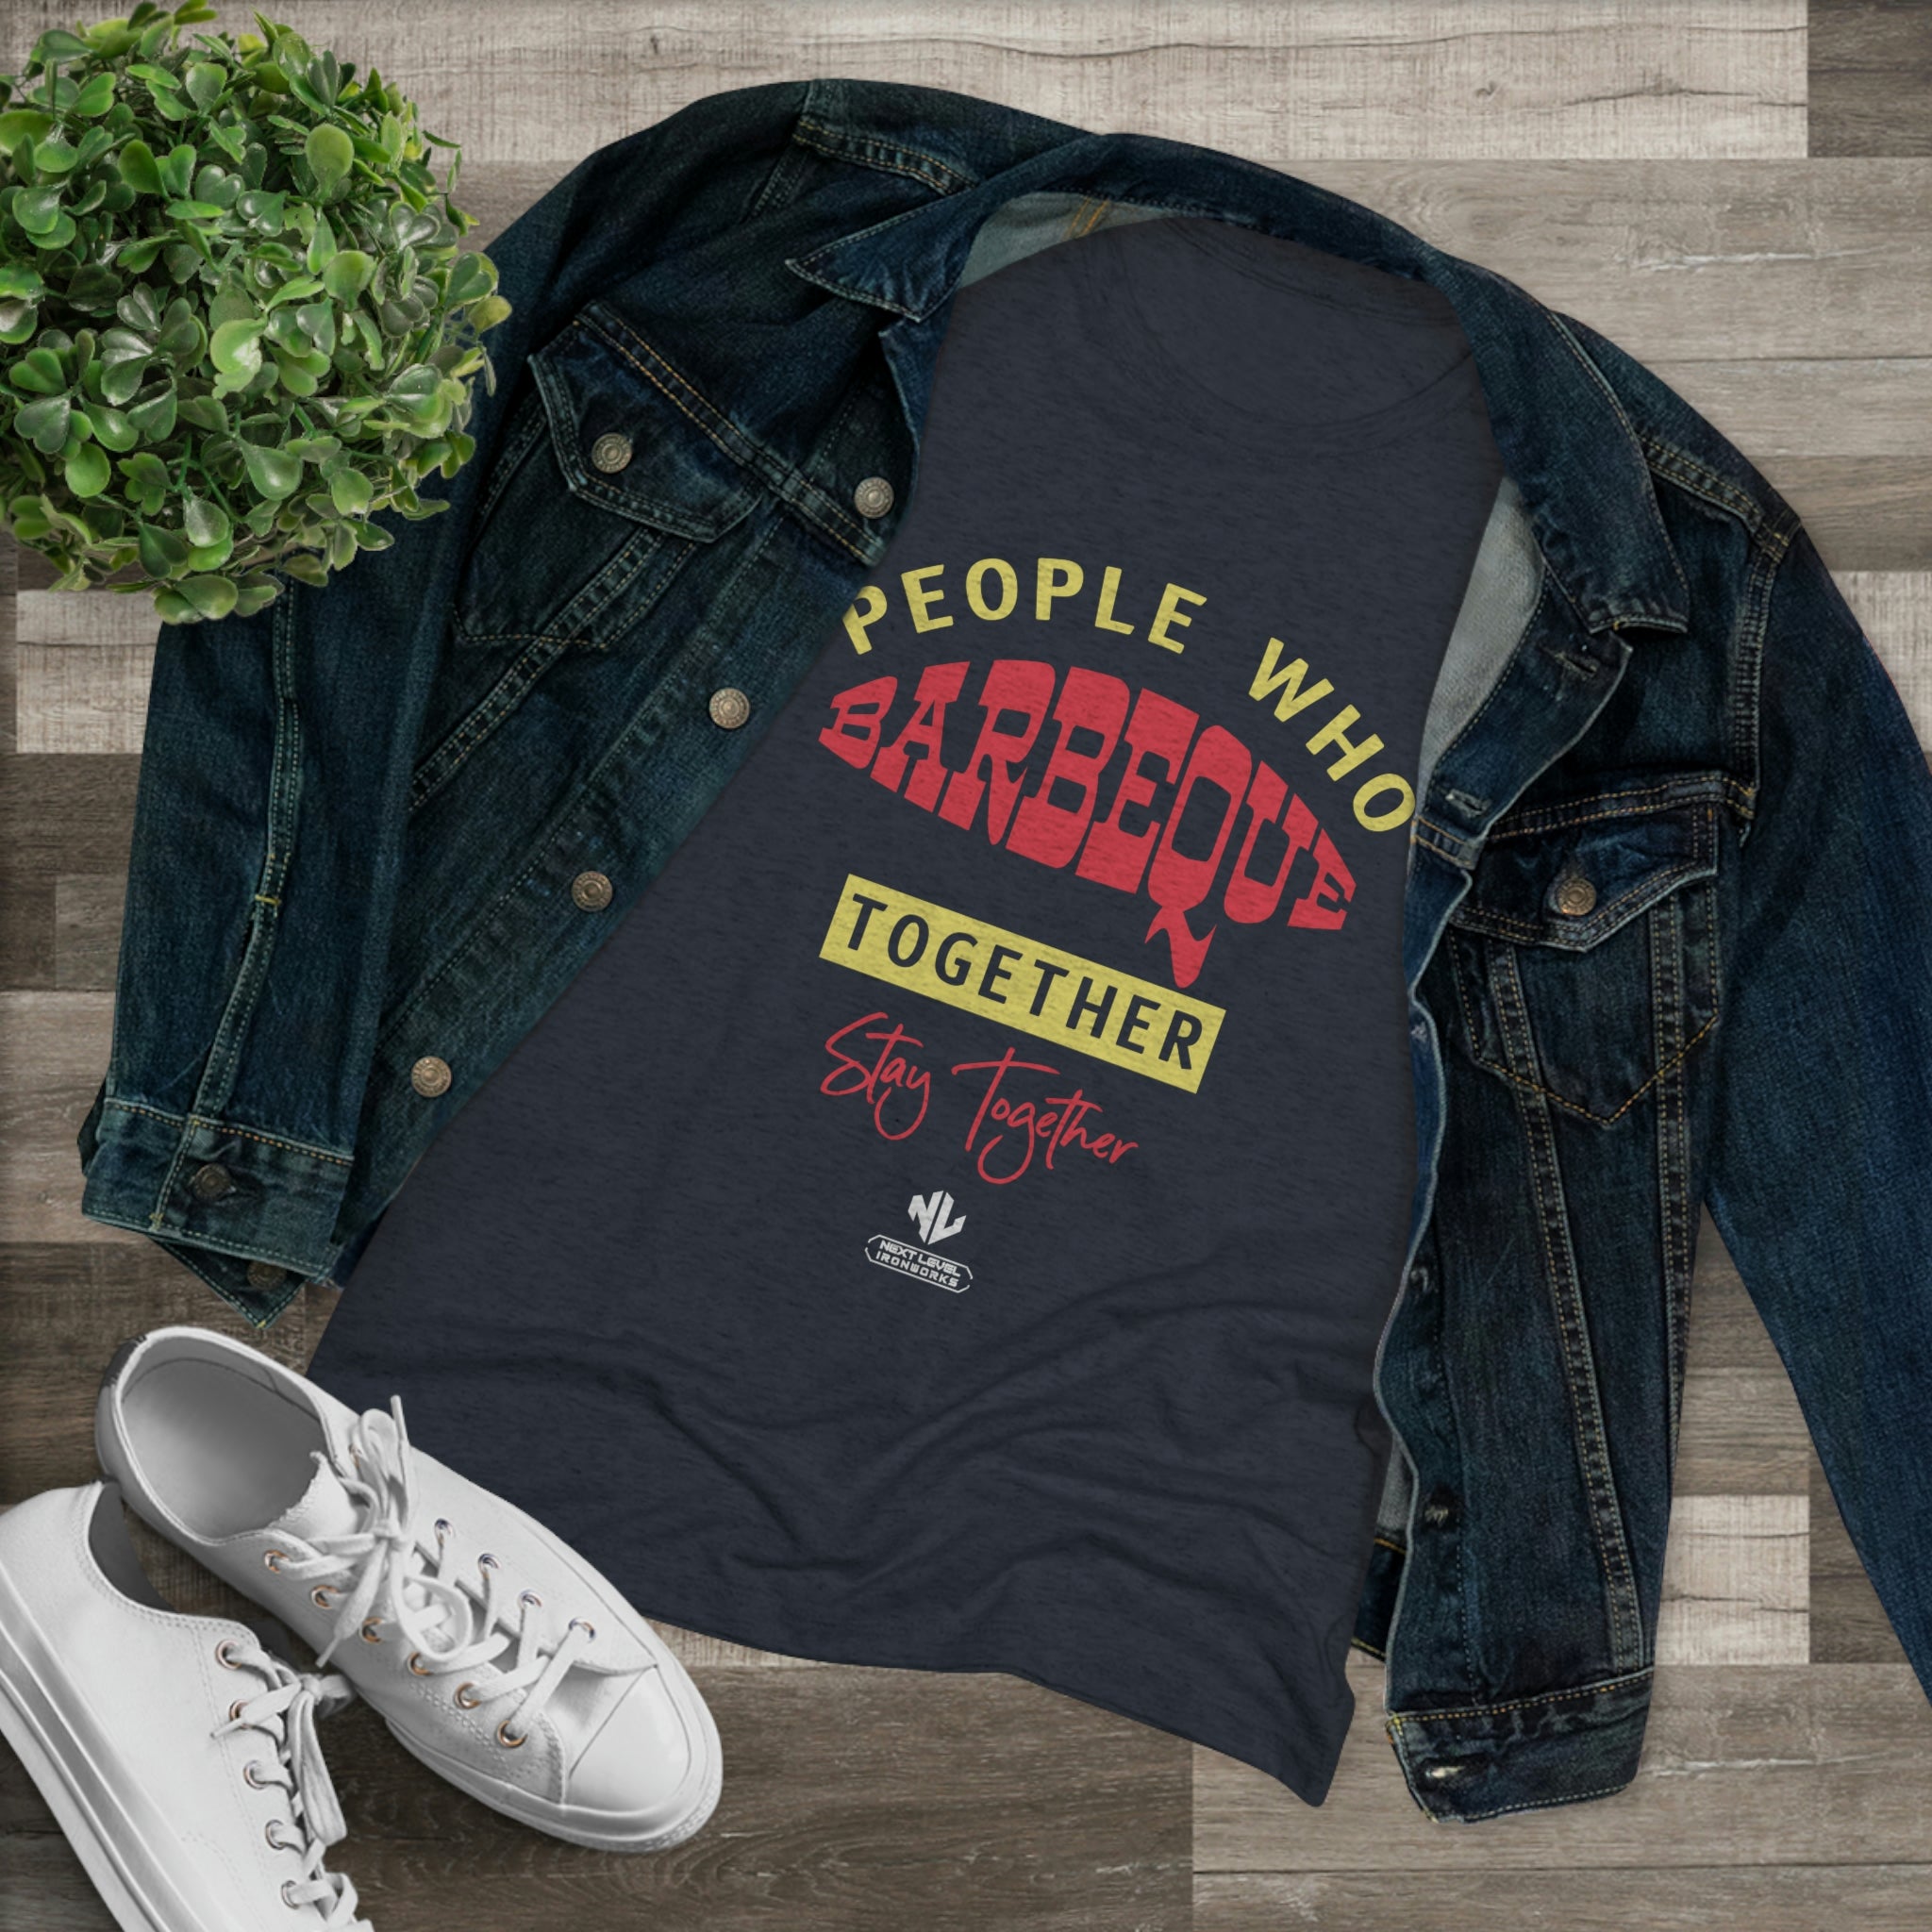 People Who Barbecue Together Stay Together women's shirt